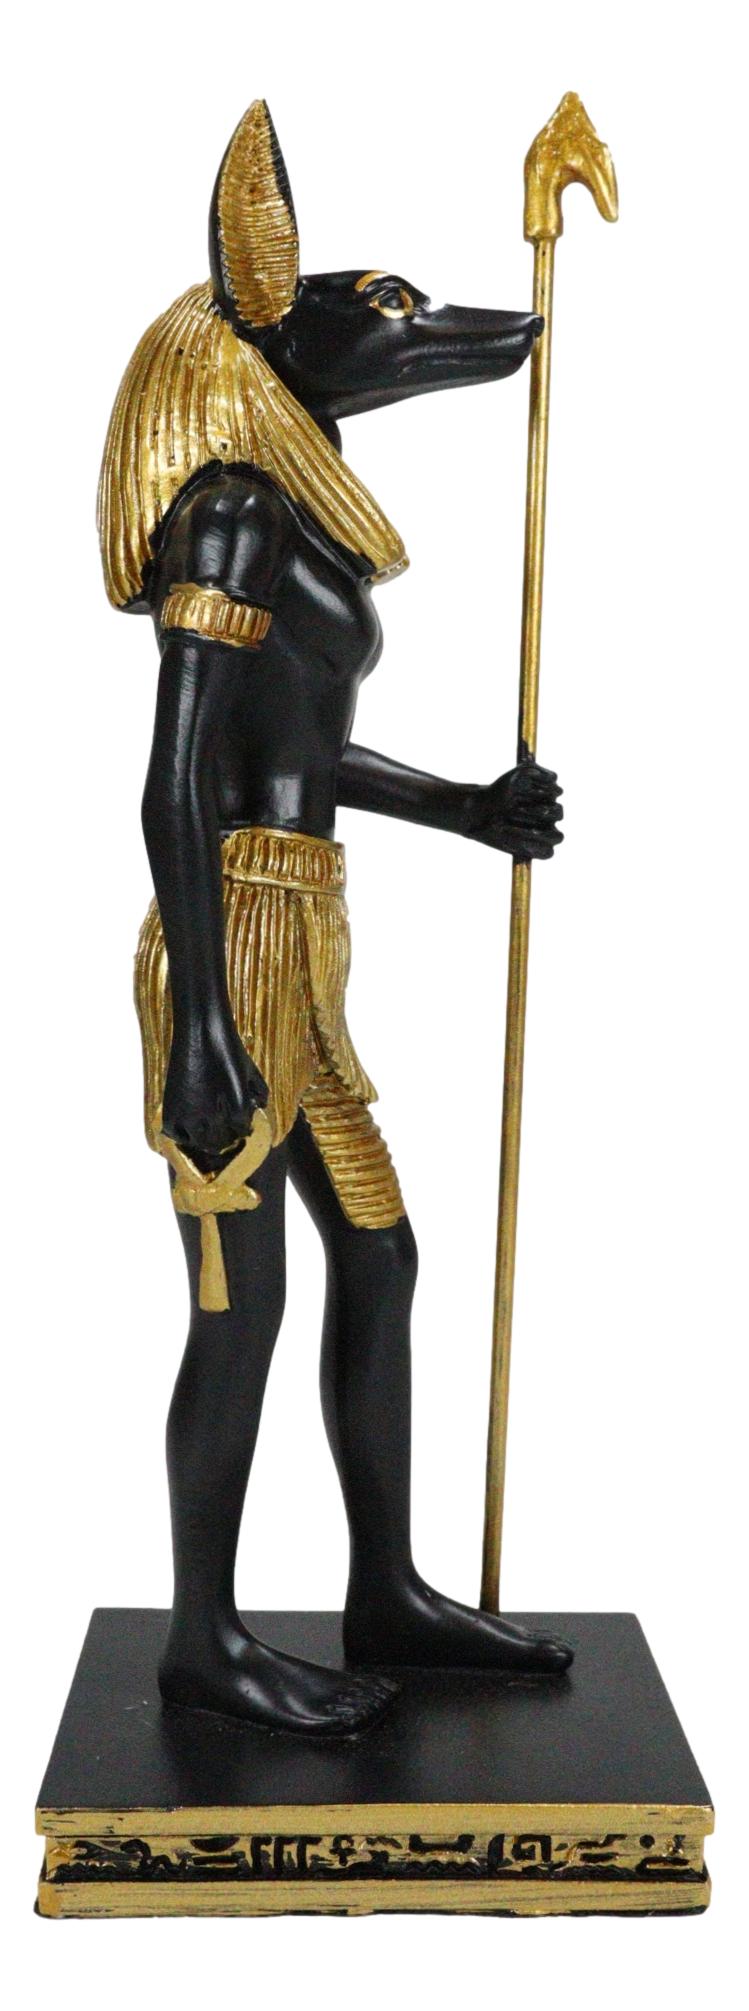 Egyptian God Anubis With Staff and Ankh Standing On Hieroglyphic Base Figurine